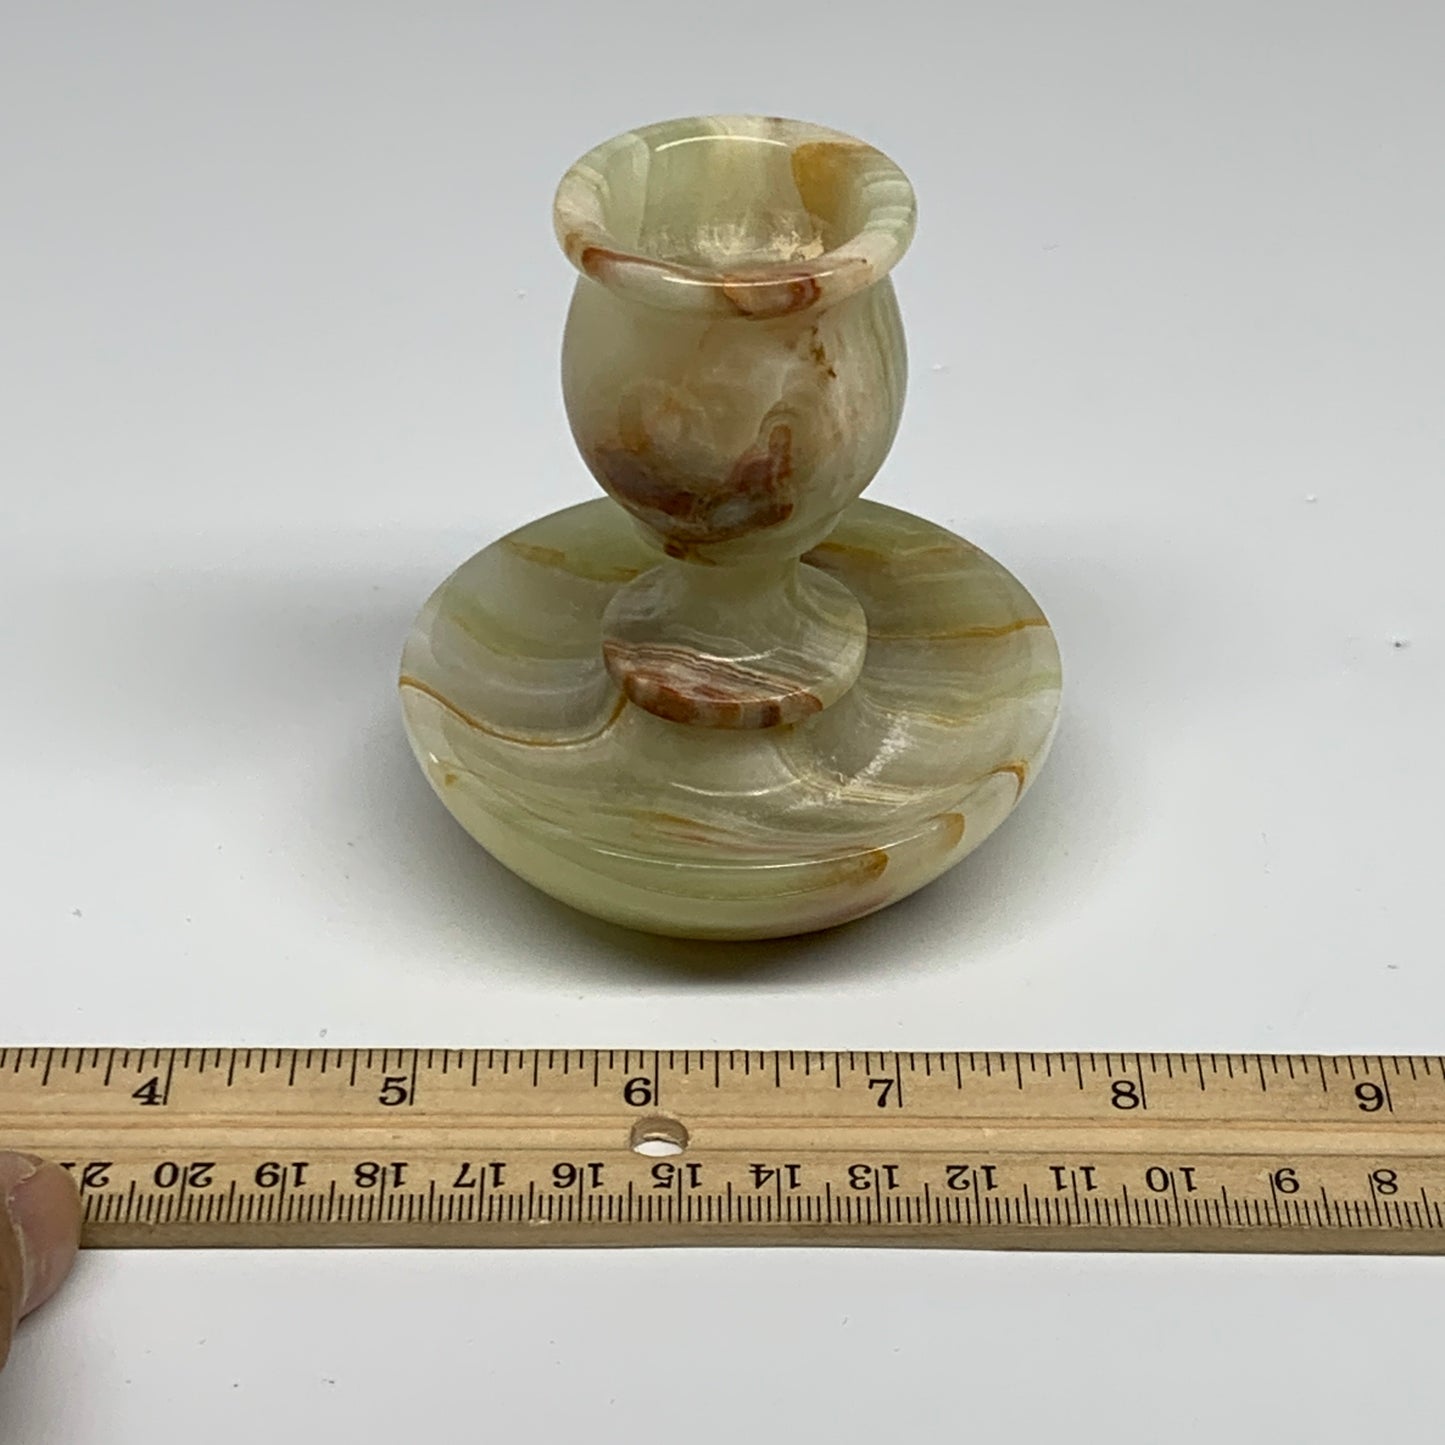 253g, 3.2"x1.4"x2.9", Natural Green Onyx Candle Holder Gemstone Carved, B32244